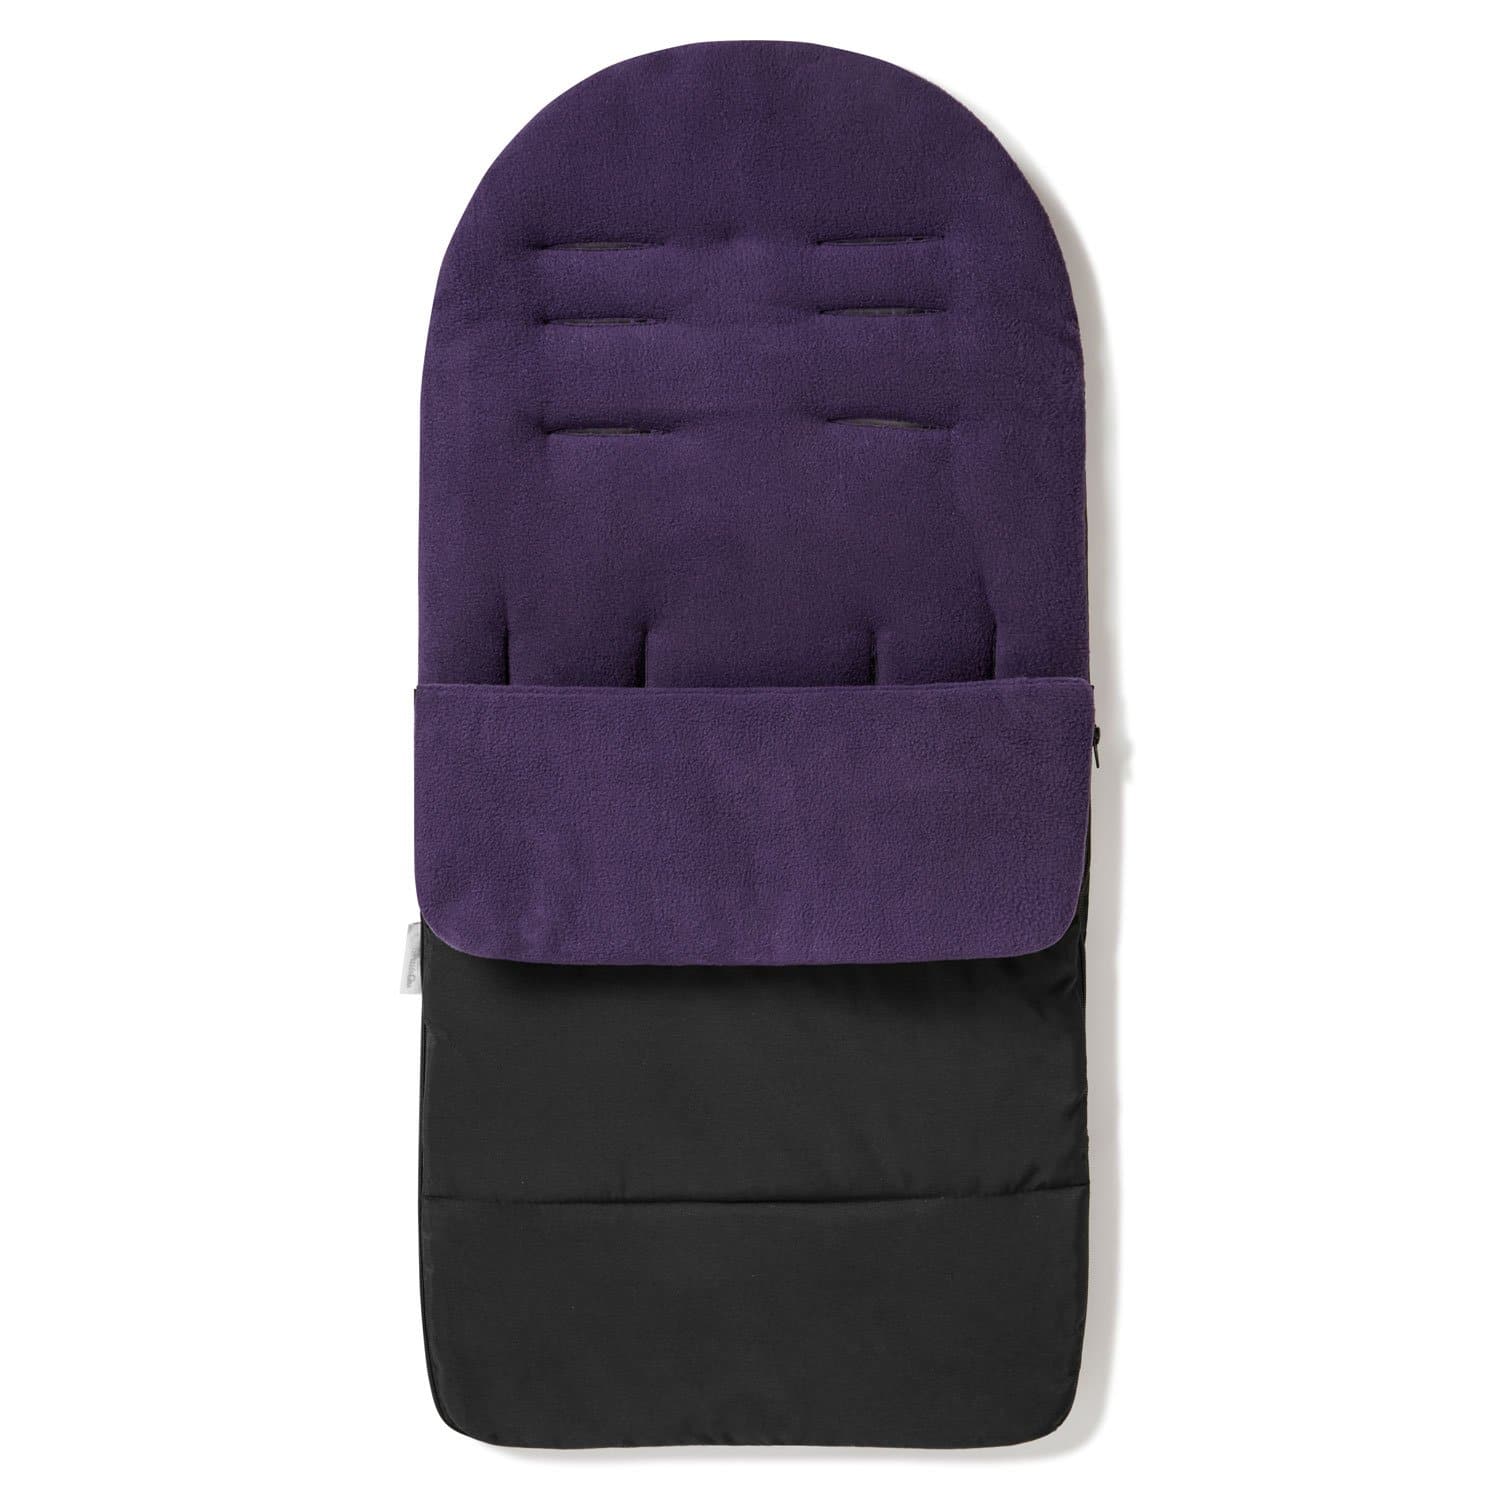 Premium Footmuff / Cosy Toes Compatible with Babybus - Plum Purple / Fits All Models | For Your Little One